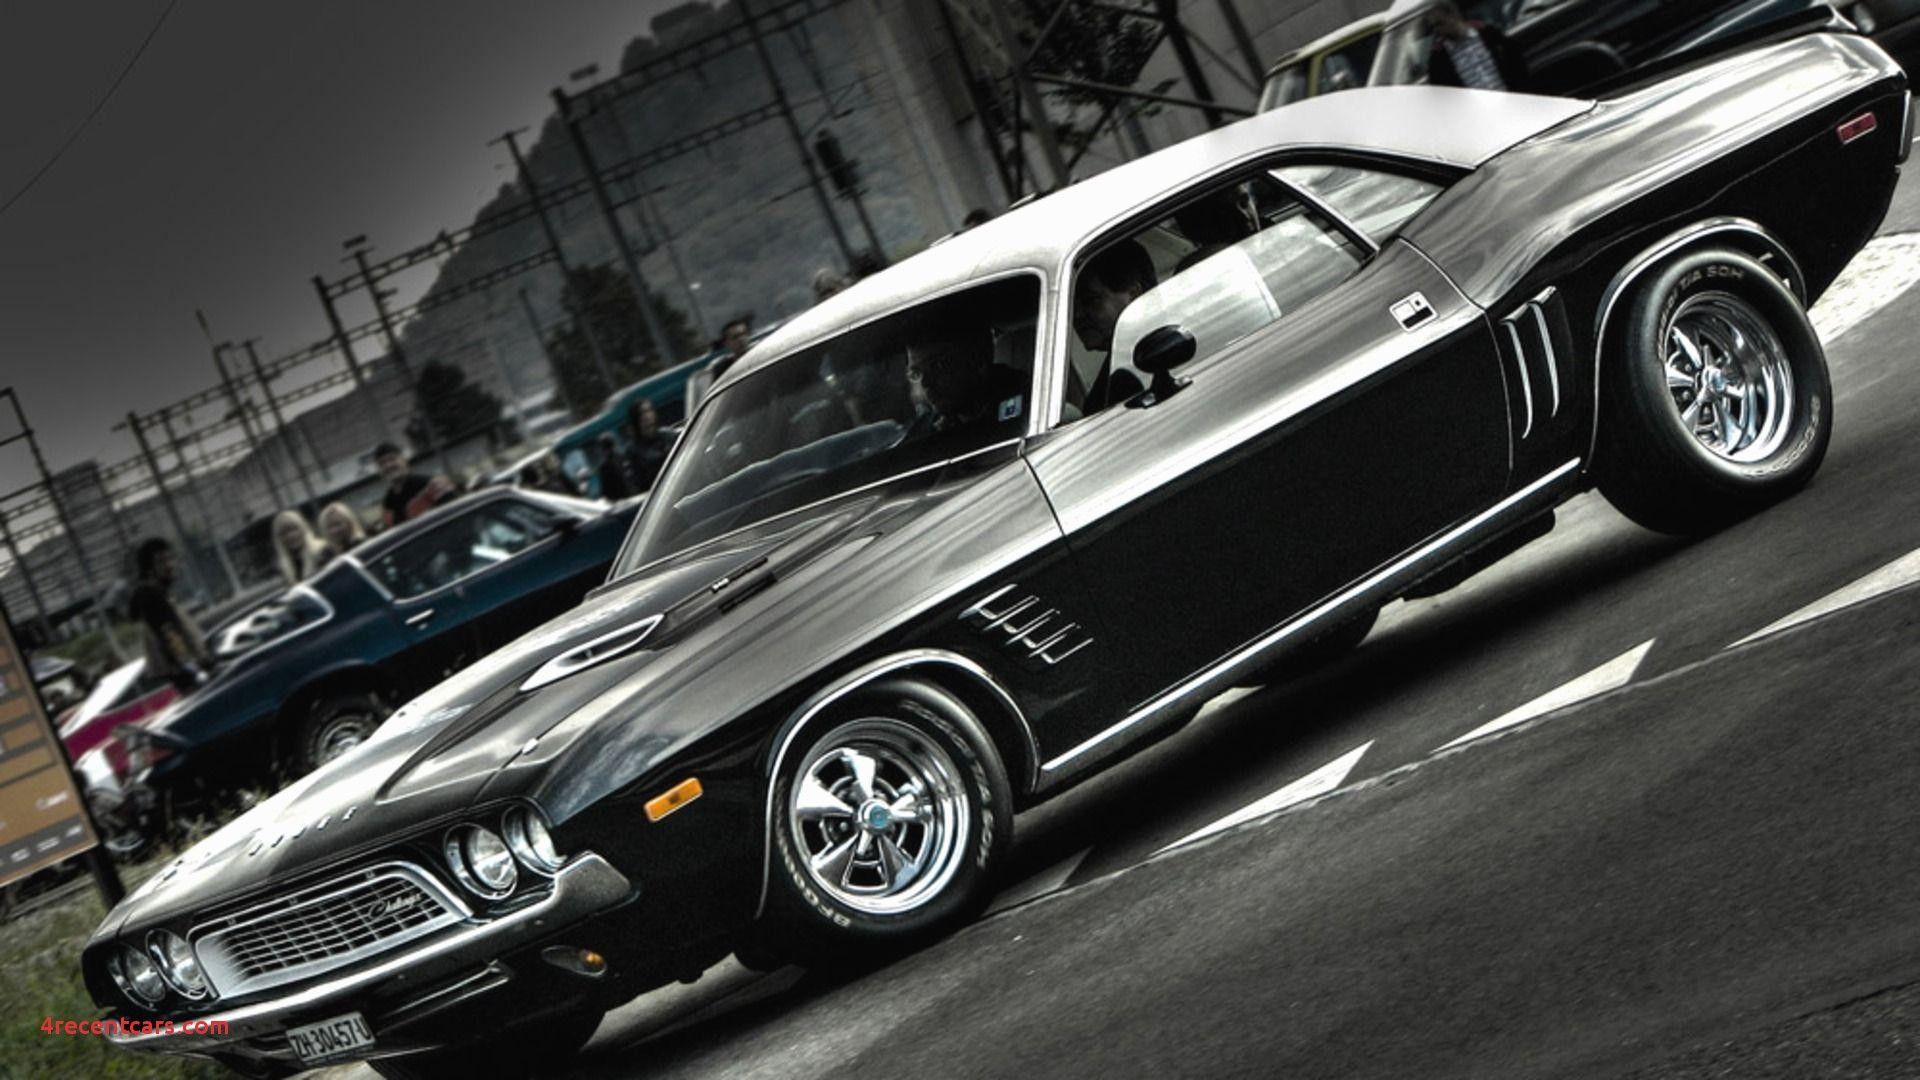 American Muscle Cars Wallpaper Unique Muscle Cars HD Wallpaper